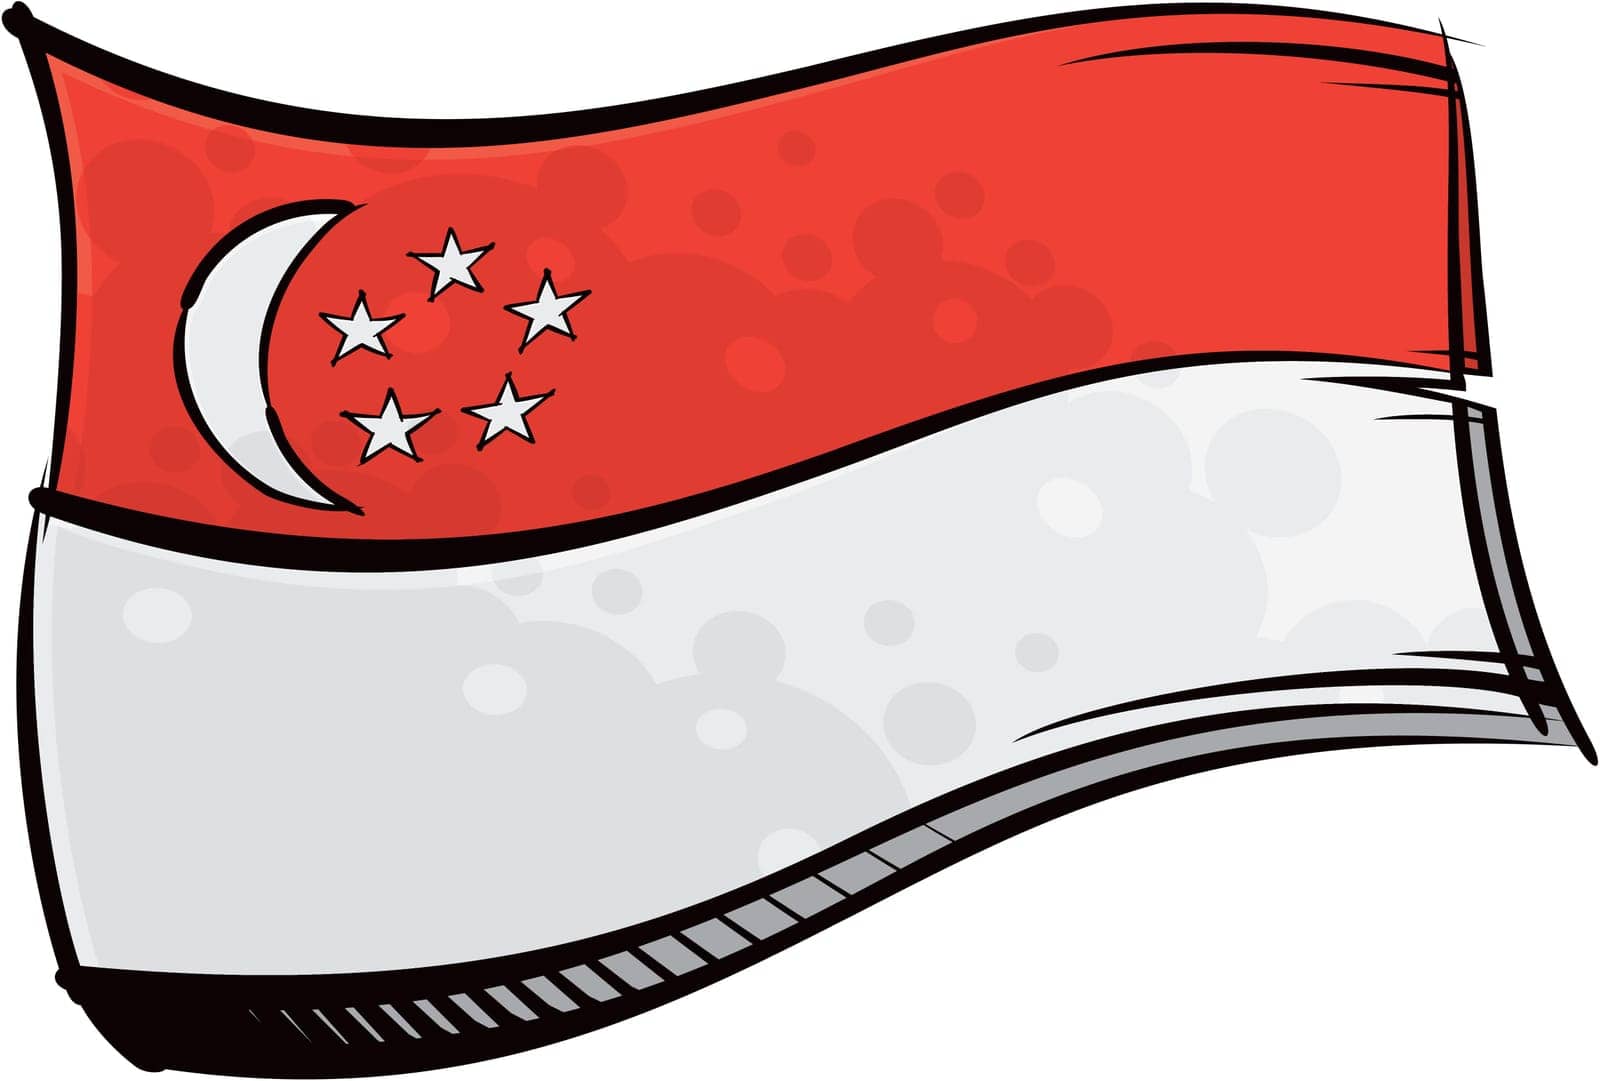 Painted Singapore flag waving in wind by oxygen64